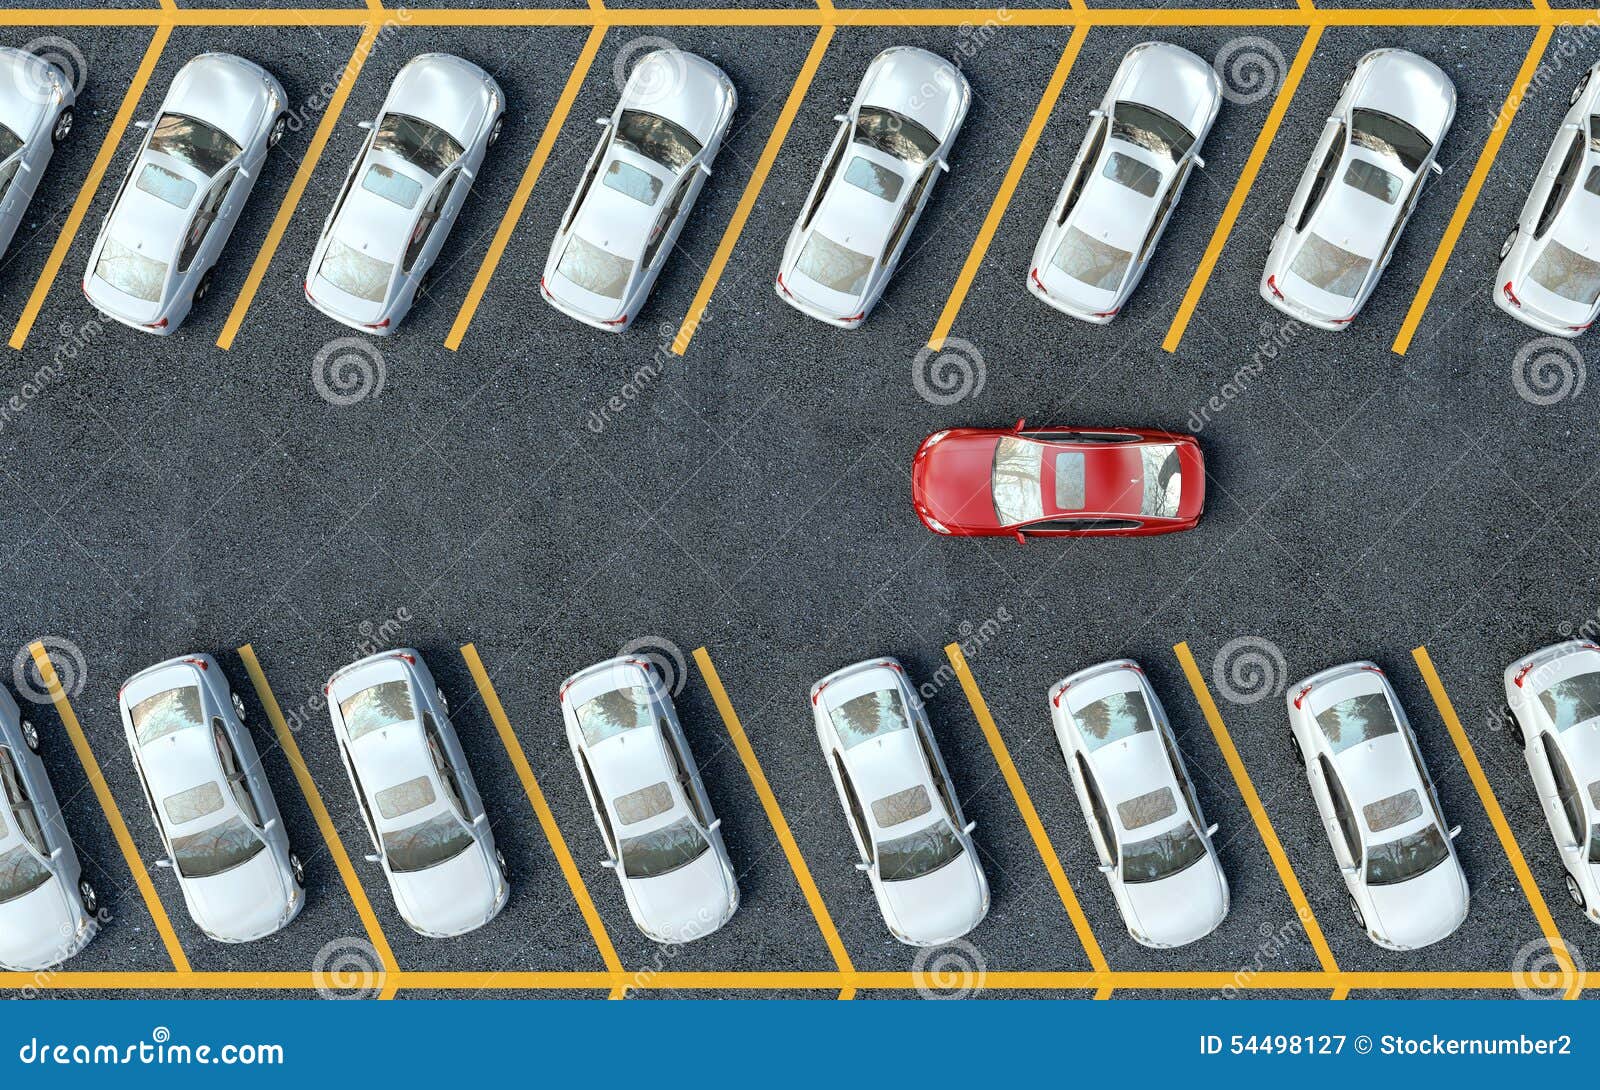 Parking Near Me - Find Best and Cheap Parking Space